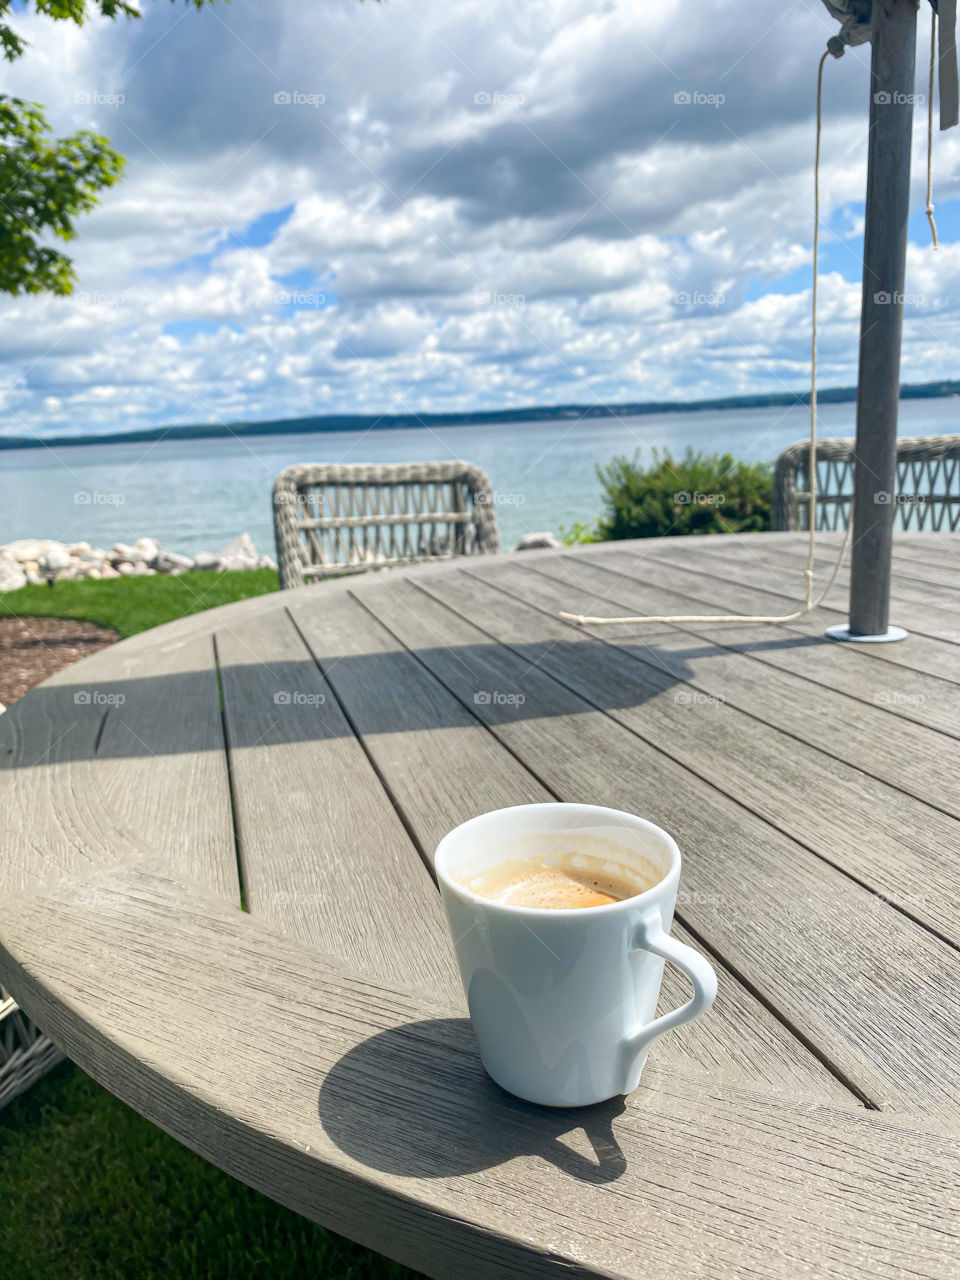 A cup of coffee enjoying the view.